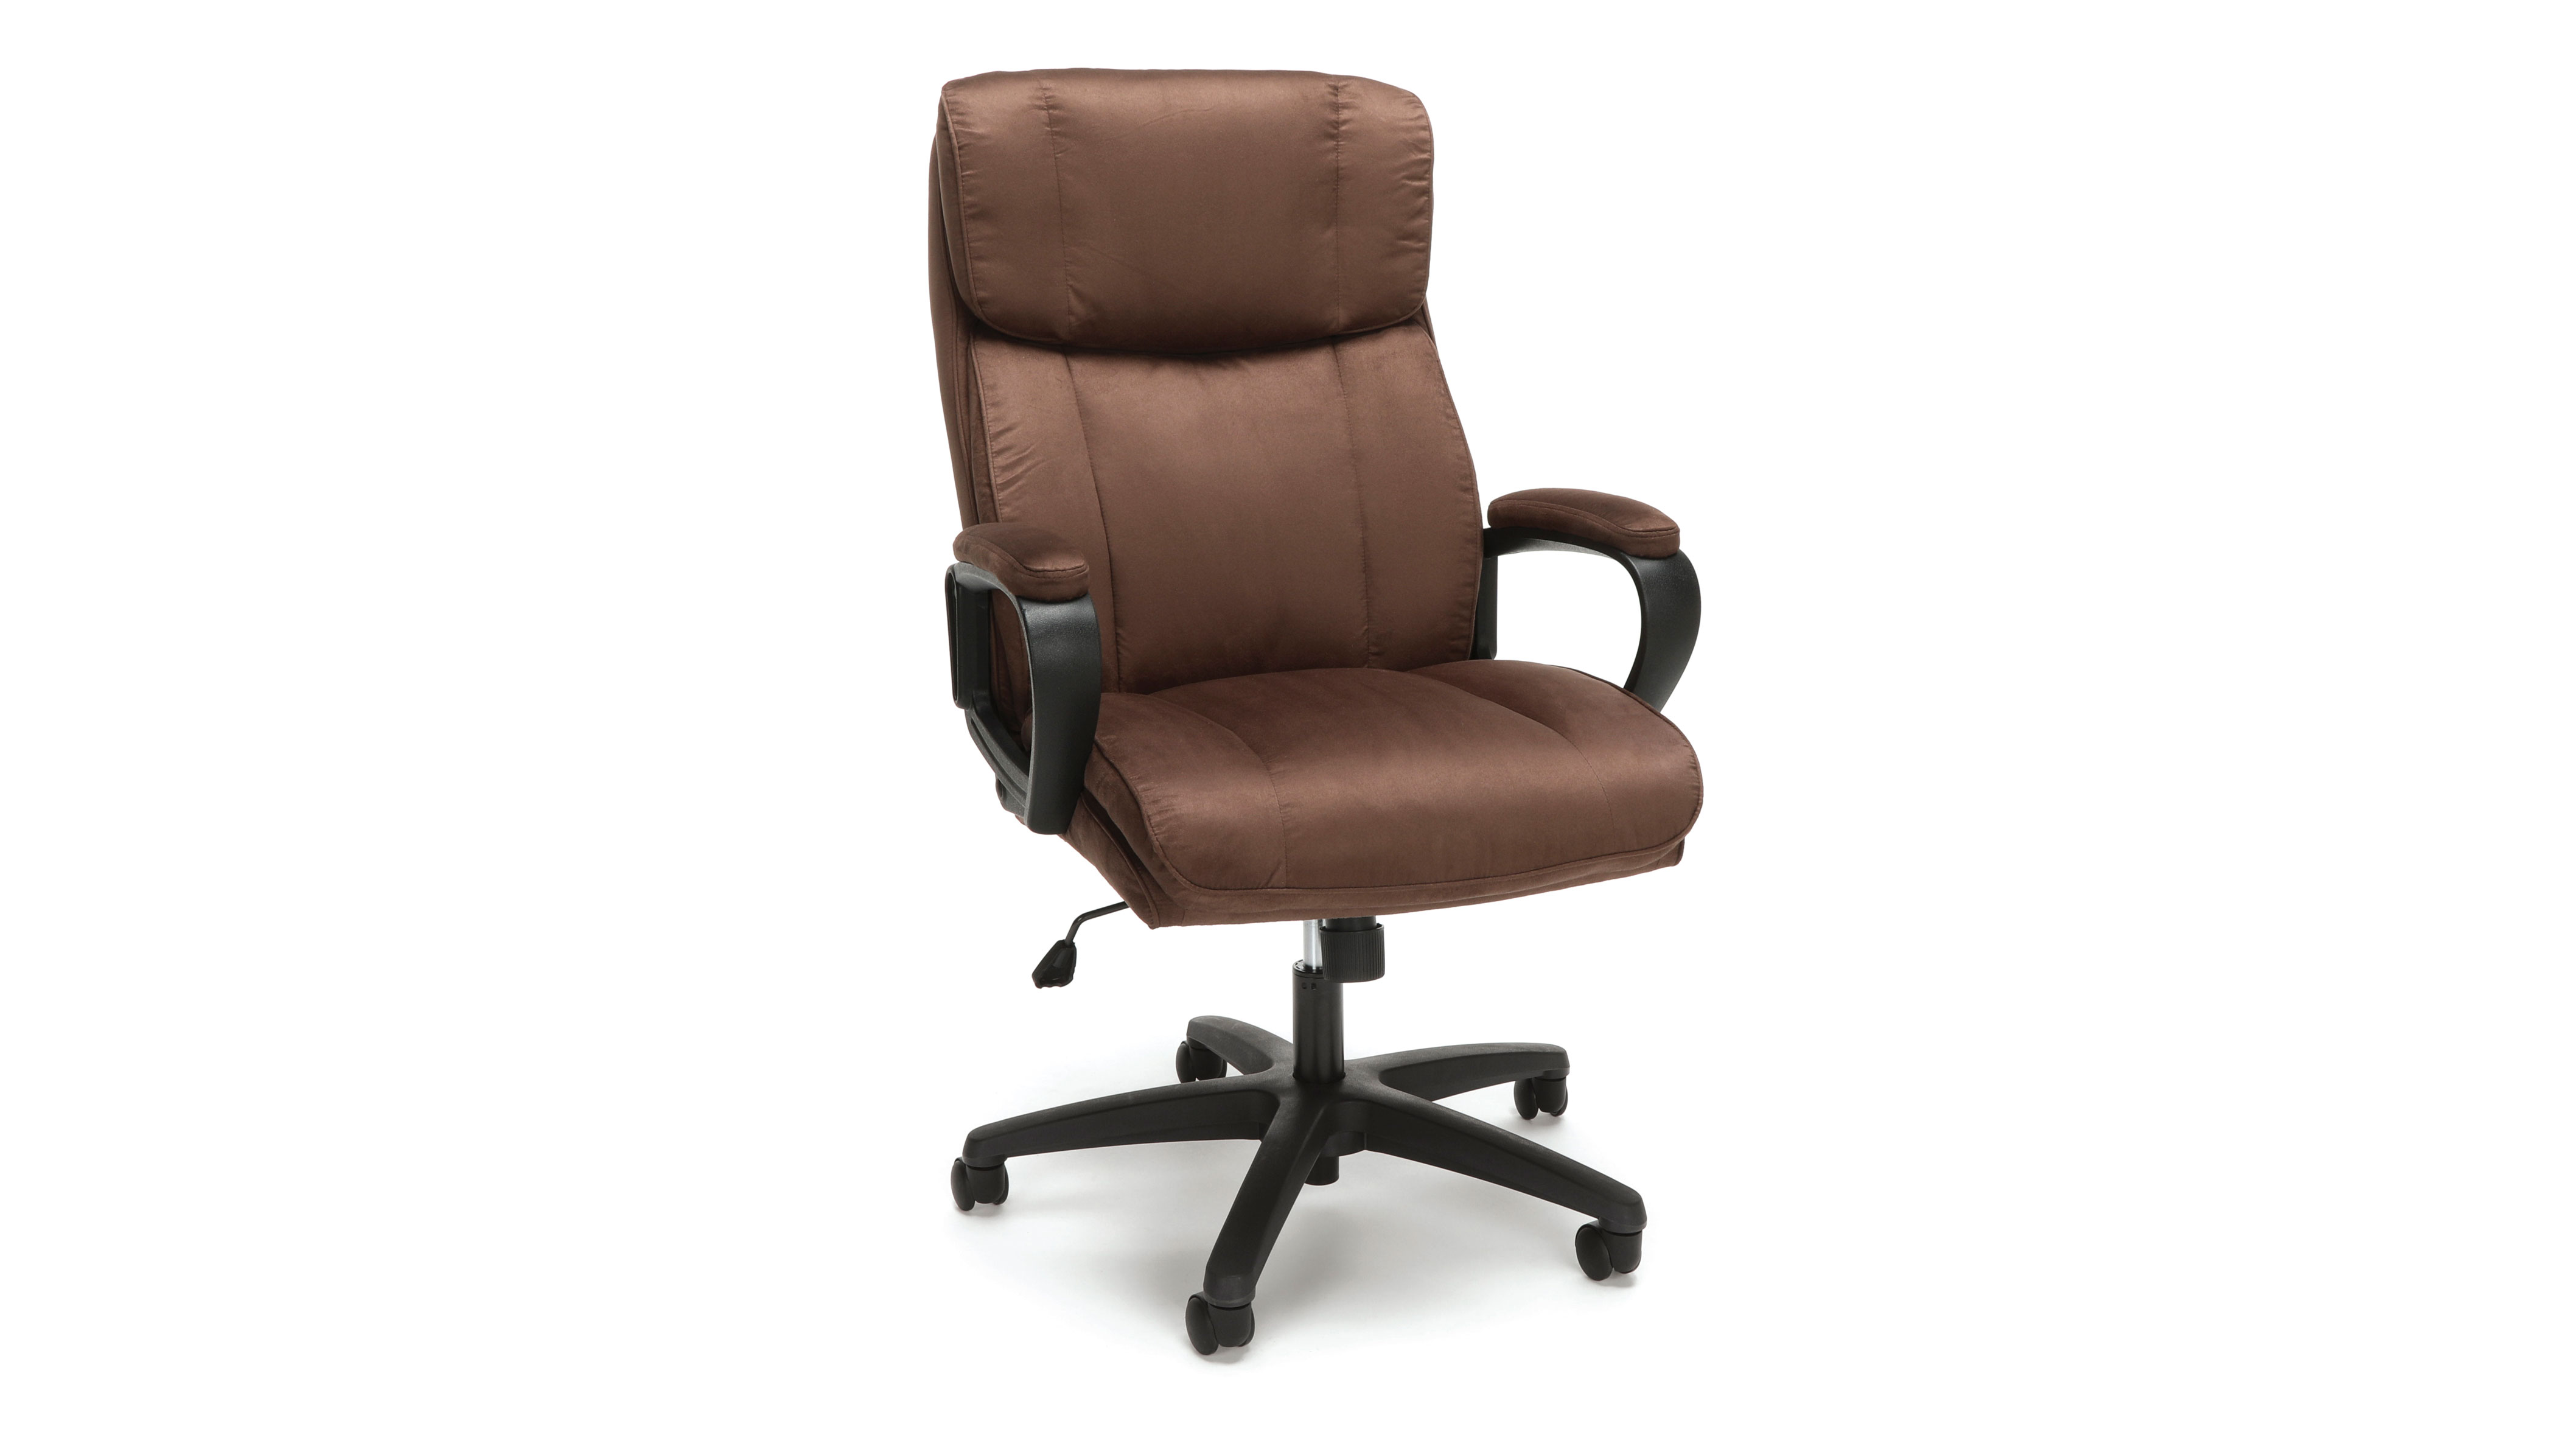 The best office chair of 2020